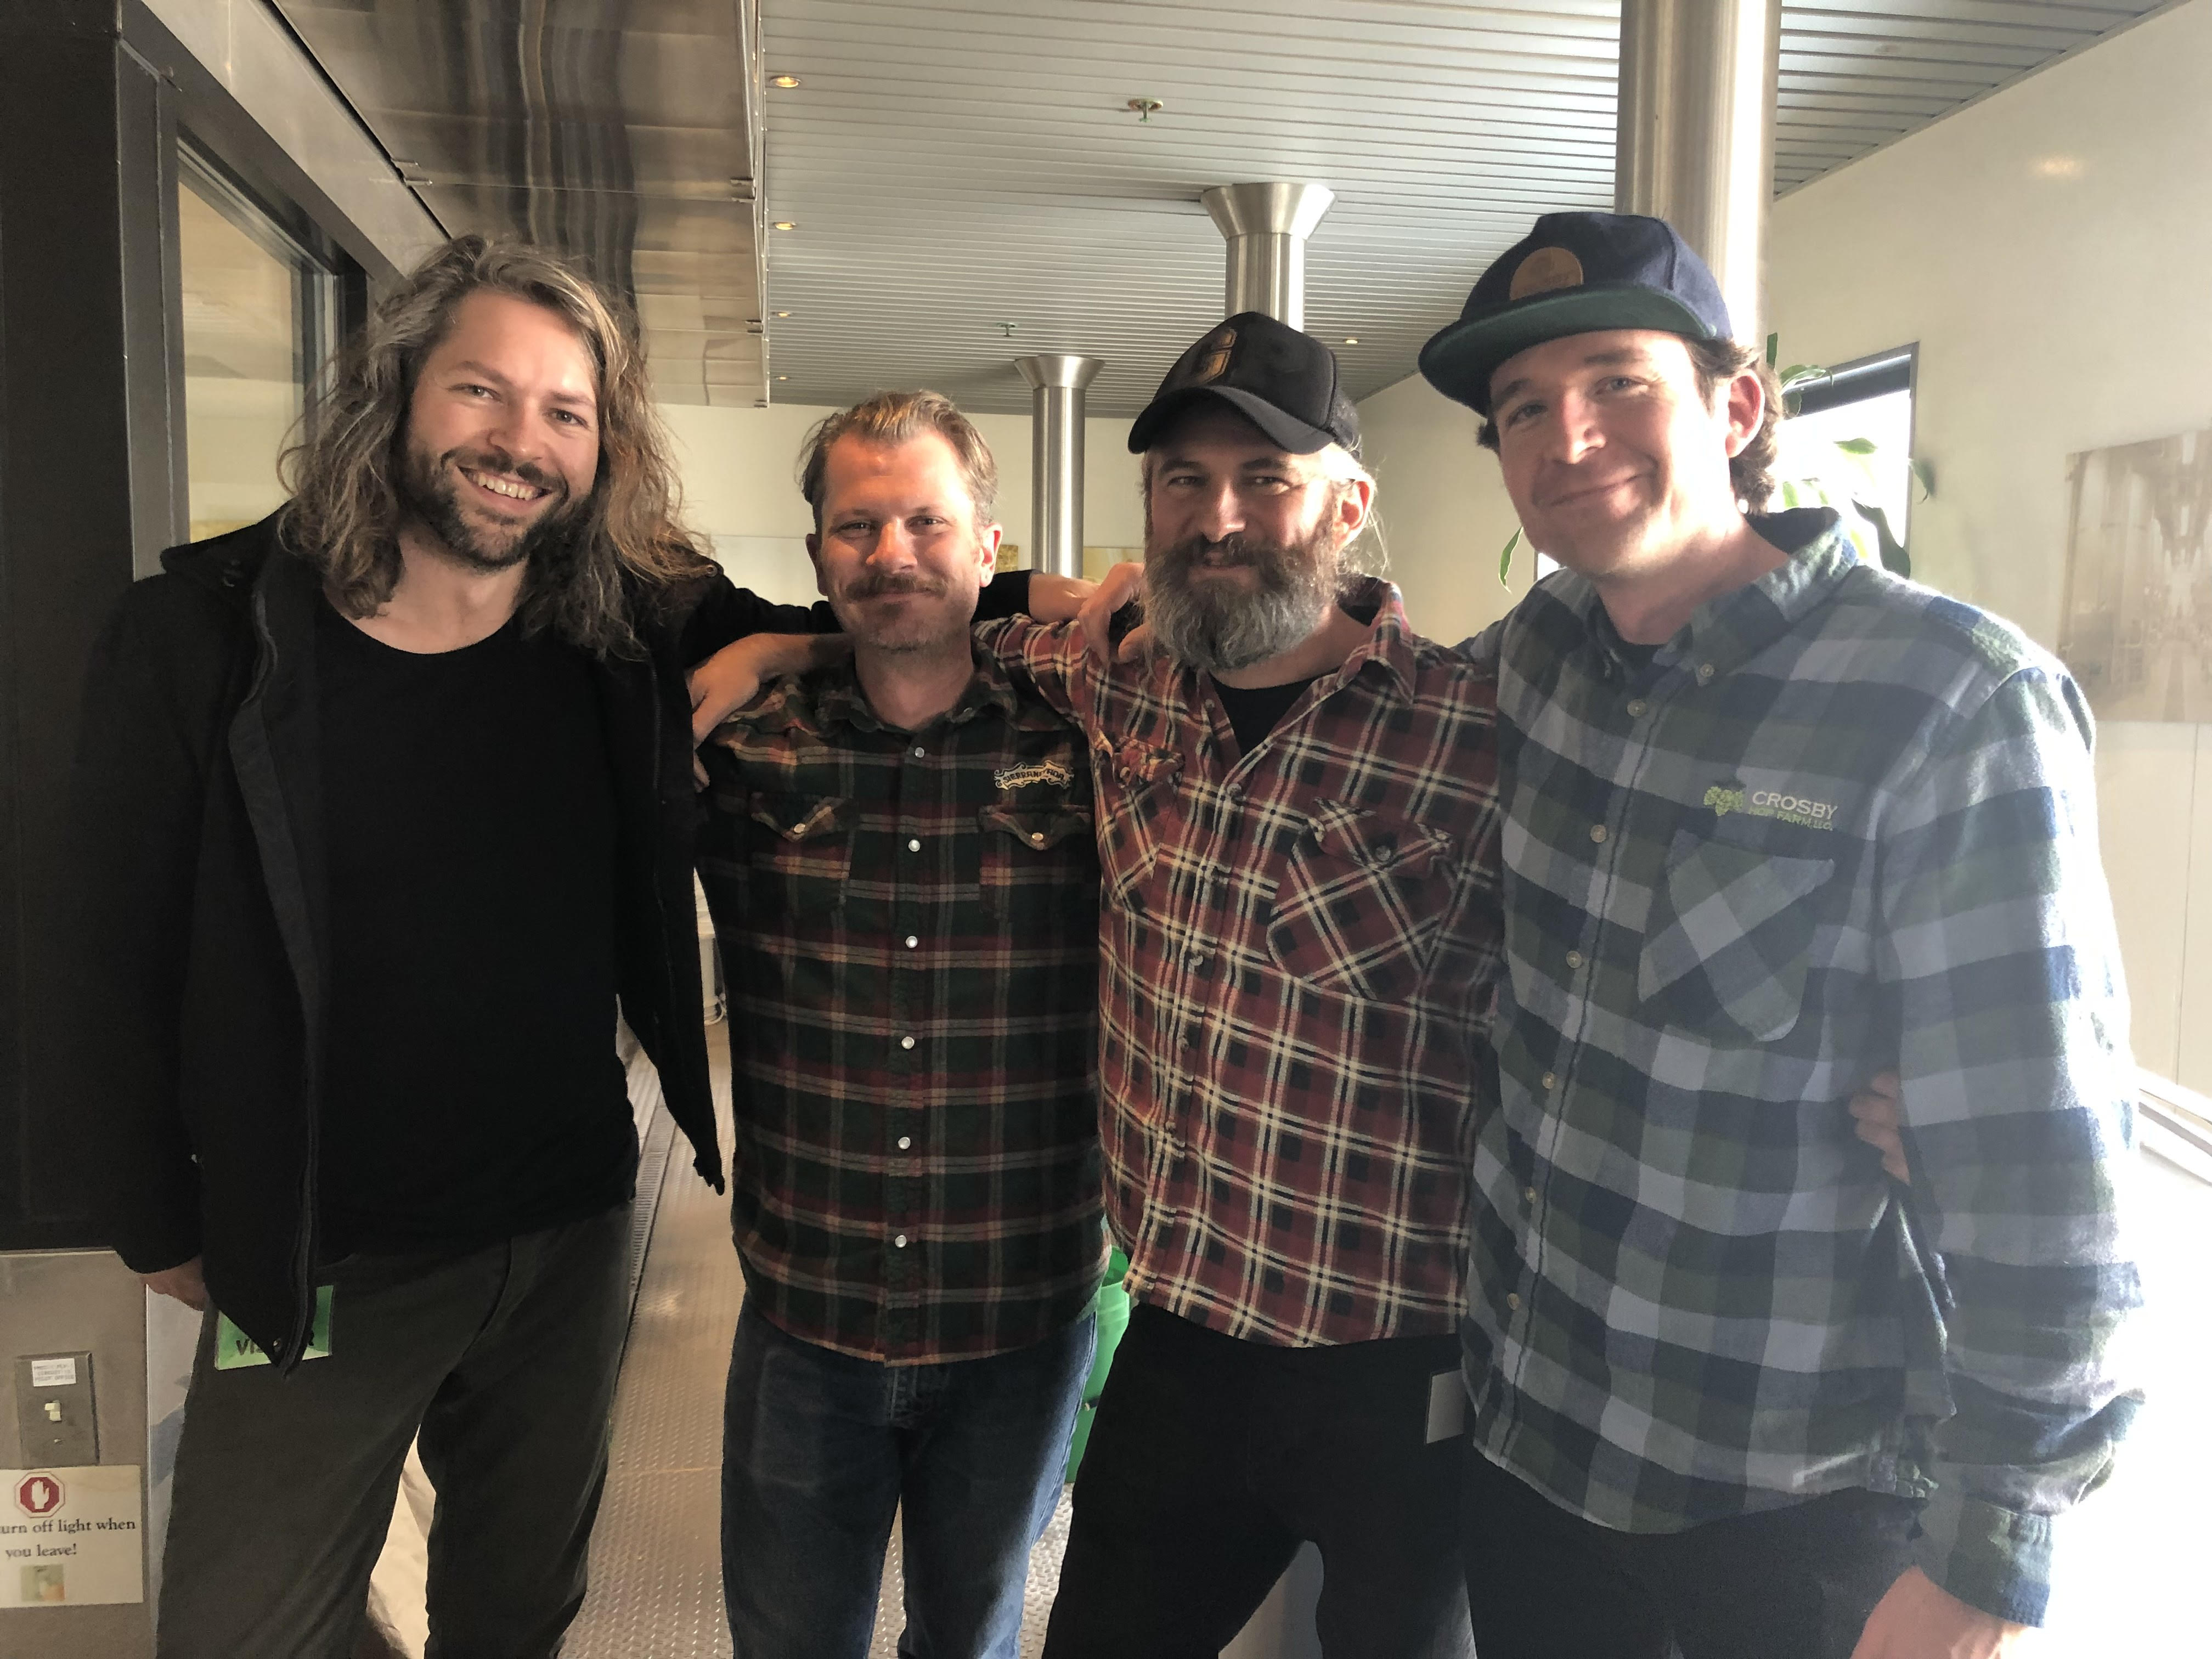 From left, Jos Ruffell - Garage Project, Isaiah Mangold - Sierra Nevada Brewer, Pete Gillespie - Garage Project, and Zak Schroerlucke - Crosby Hop Farm collaborating on a beer for the 2019 Craft Brewers Conference. (image courtesy of Crosby Hop Farm)